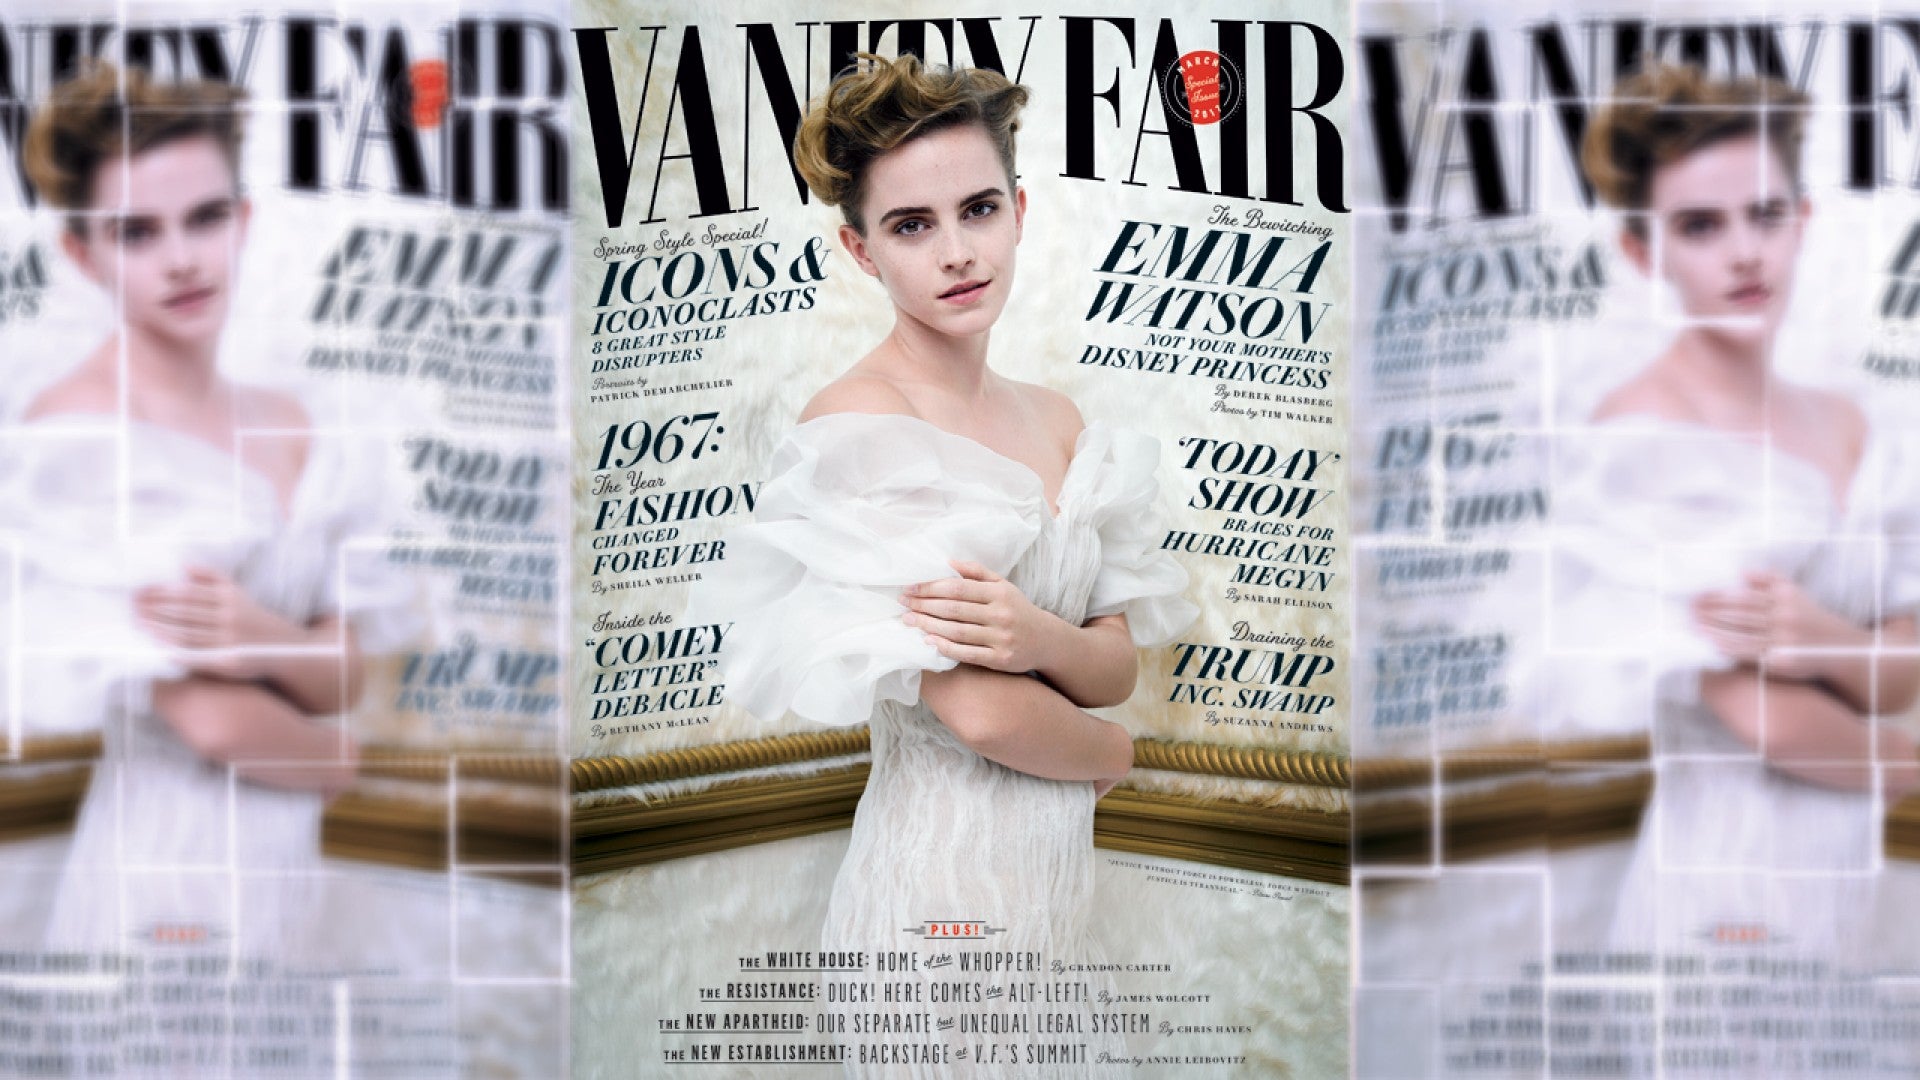 Emma Watson Shower Porn - https://www.etonline.com/media/video/sofia_richie_snapchats_from_the_hospital_after_severe_food_poisoning_worst_day_ever-211686  2017-02-28T16:00:00-08:00  https://www.etonline.com/sites/default/files/images/2017-02 ...